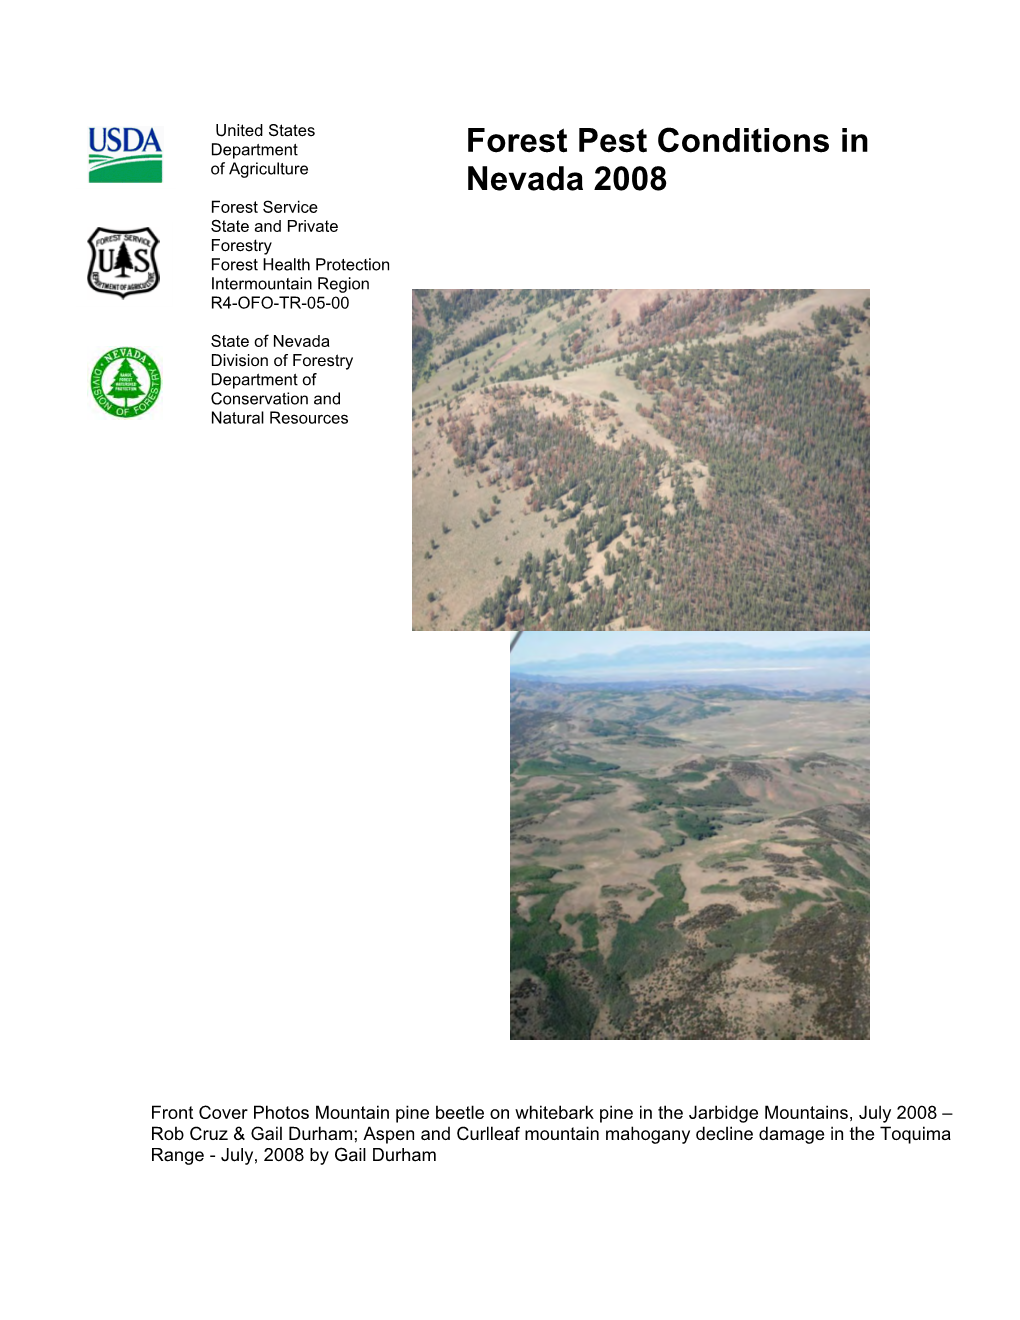 Forest Pest Conditions in Nevada 2008